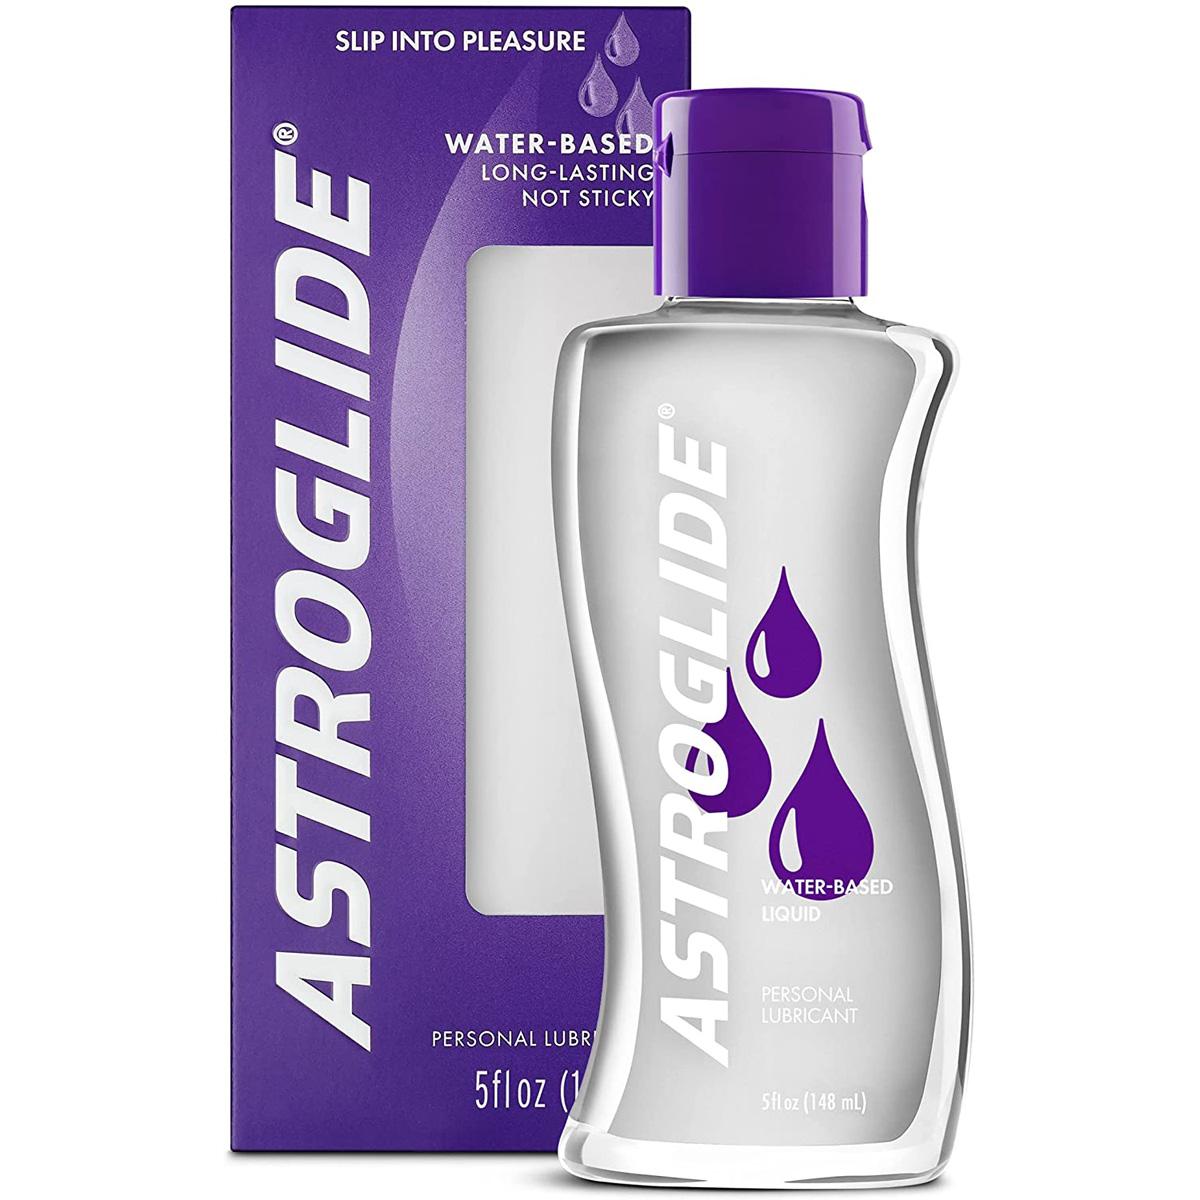  Astroglide Water Based Liquid Lubricant for $5 Shipped